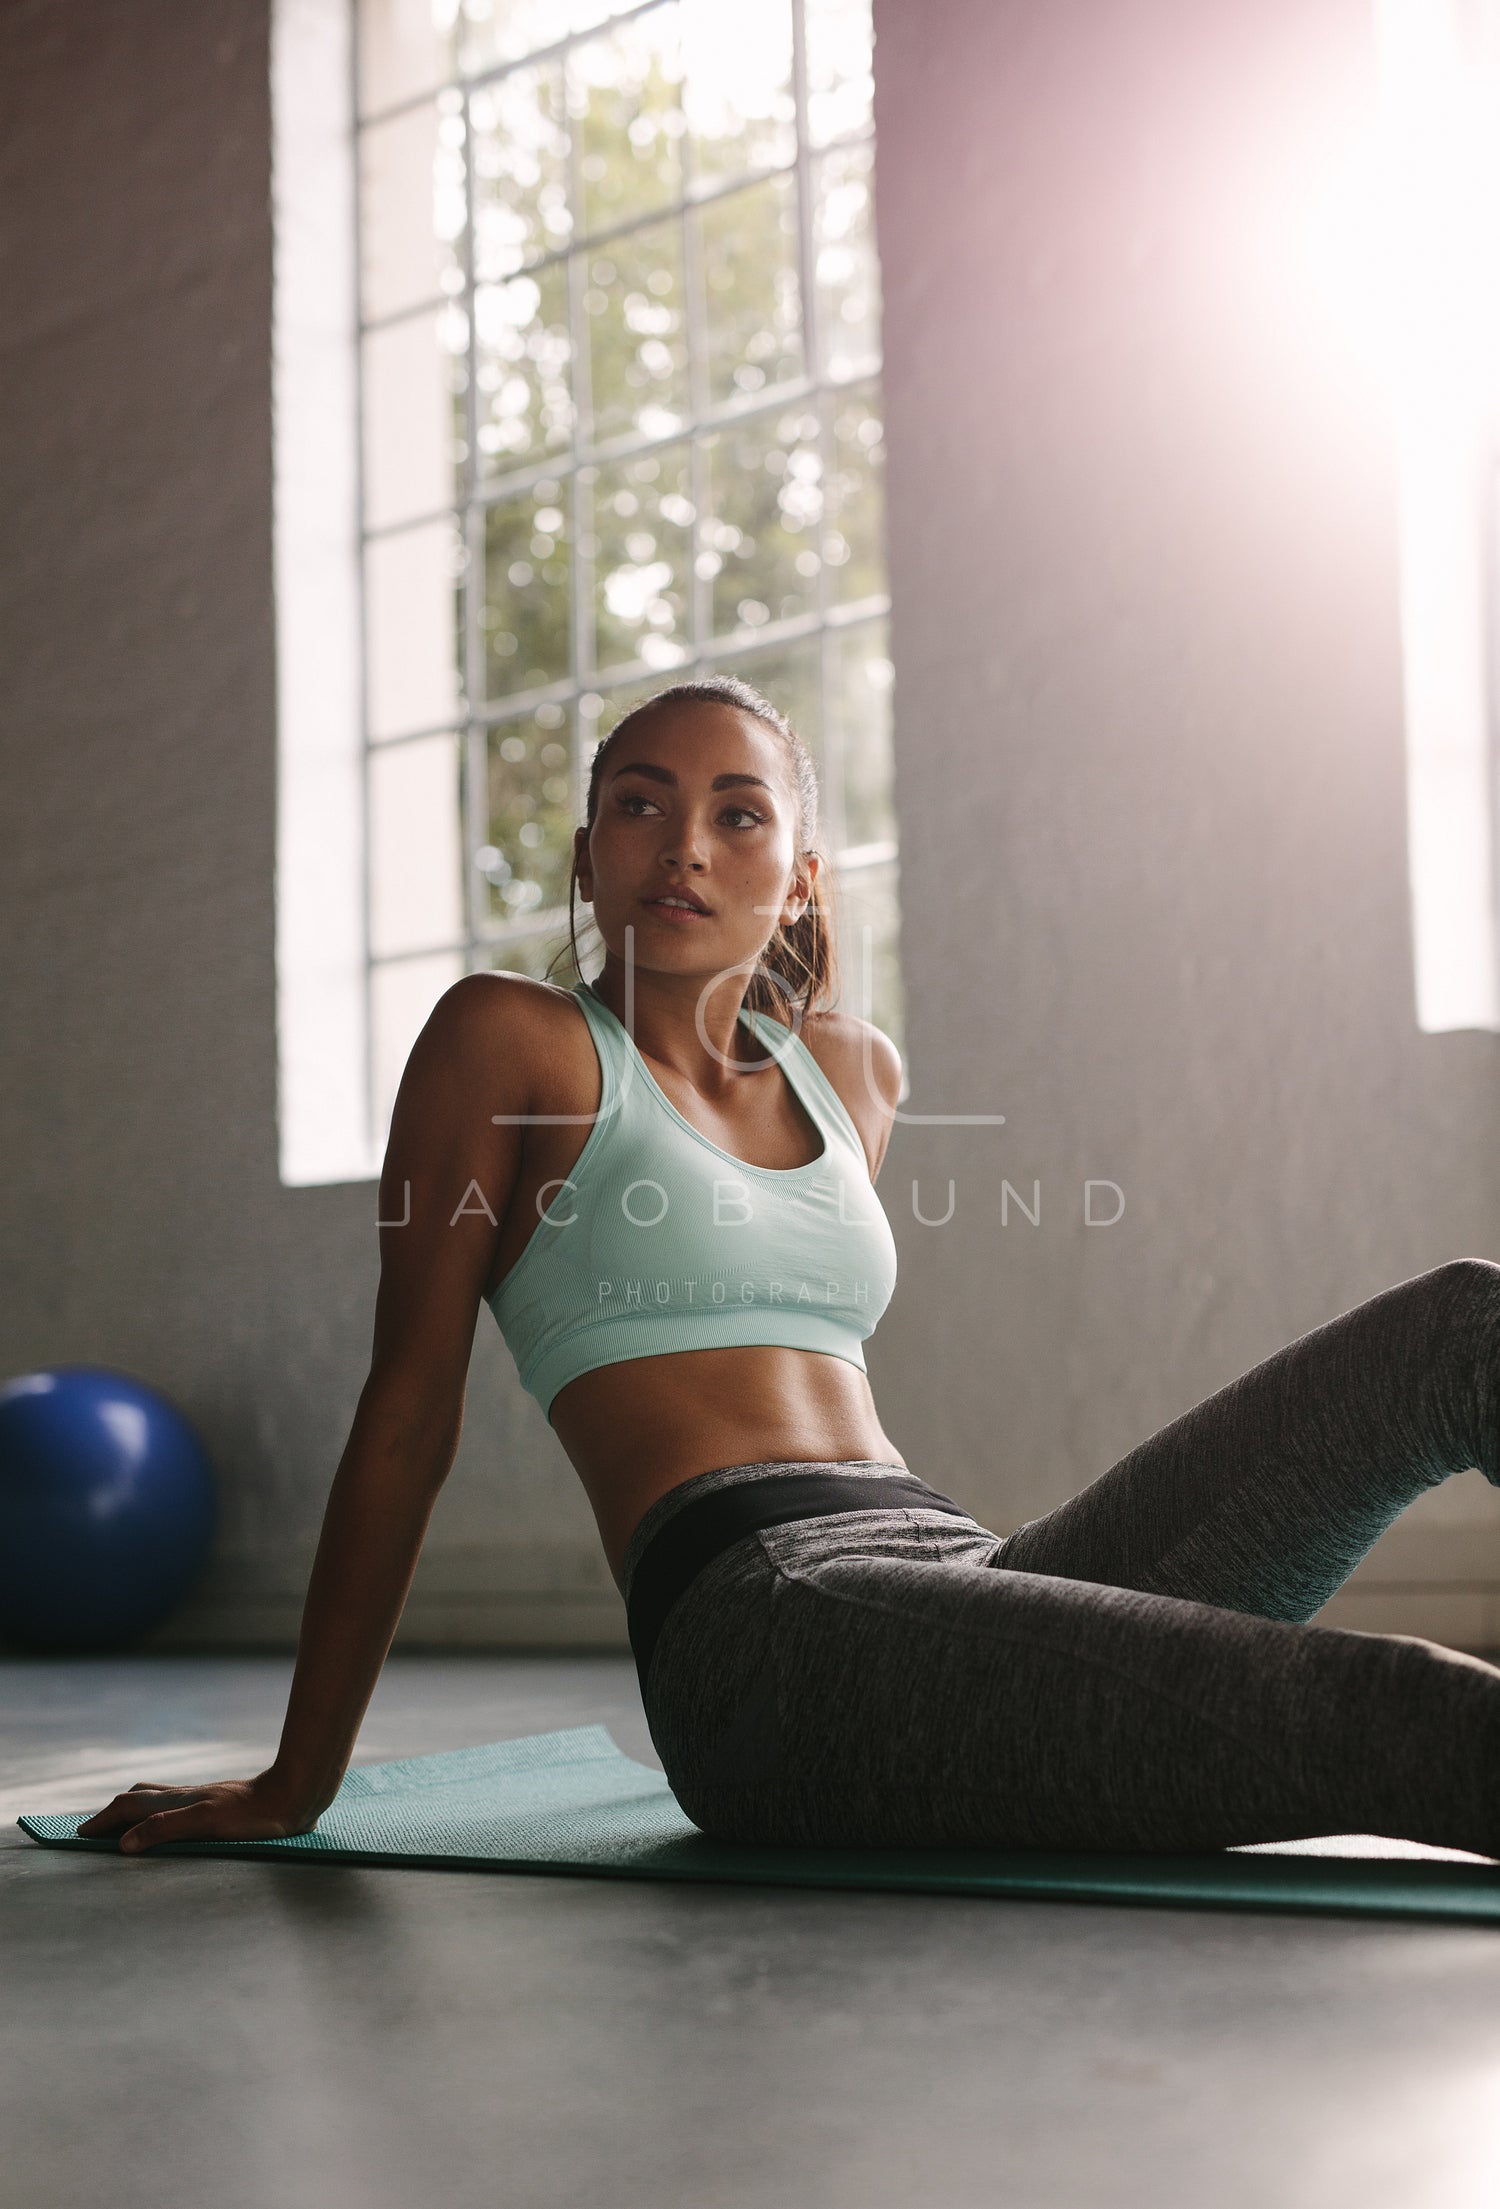 Fitness female resting after workout – Jacob Lund Photography Store-  premium stock photo